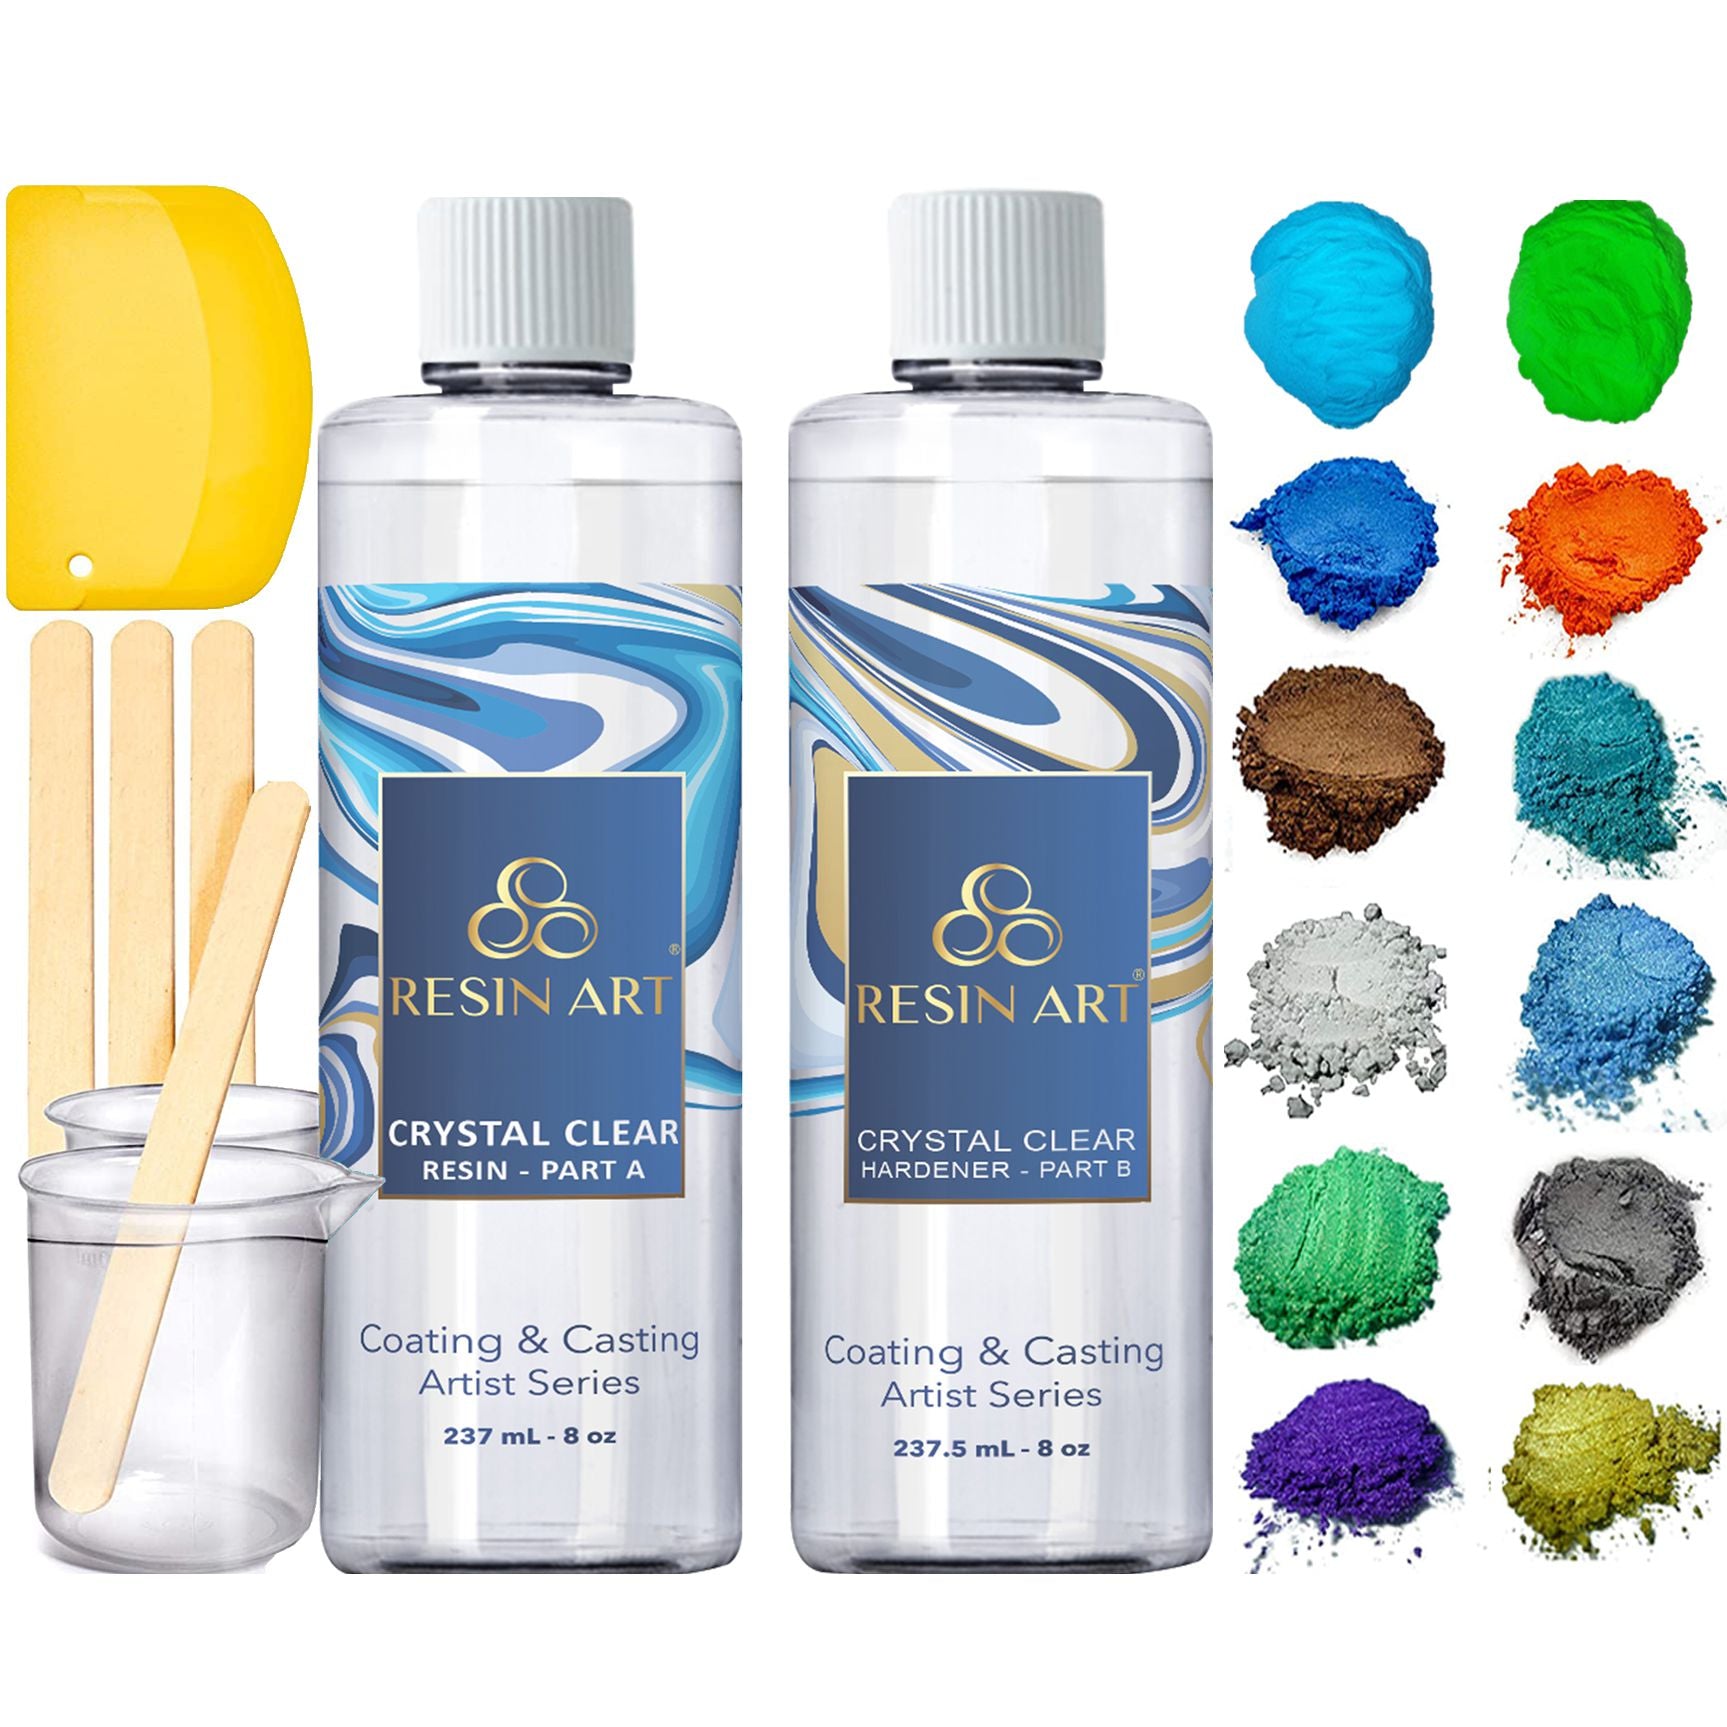 CHOCART Epoxy Resin Kit for Ocean Wave Art - 16oz (8oz Resin + 8oz Hardener) Coating Resin Kit for Art Craft - Non Toxic, Food Grade, Crystal Clear